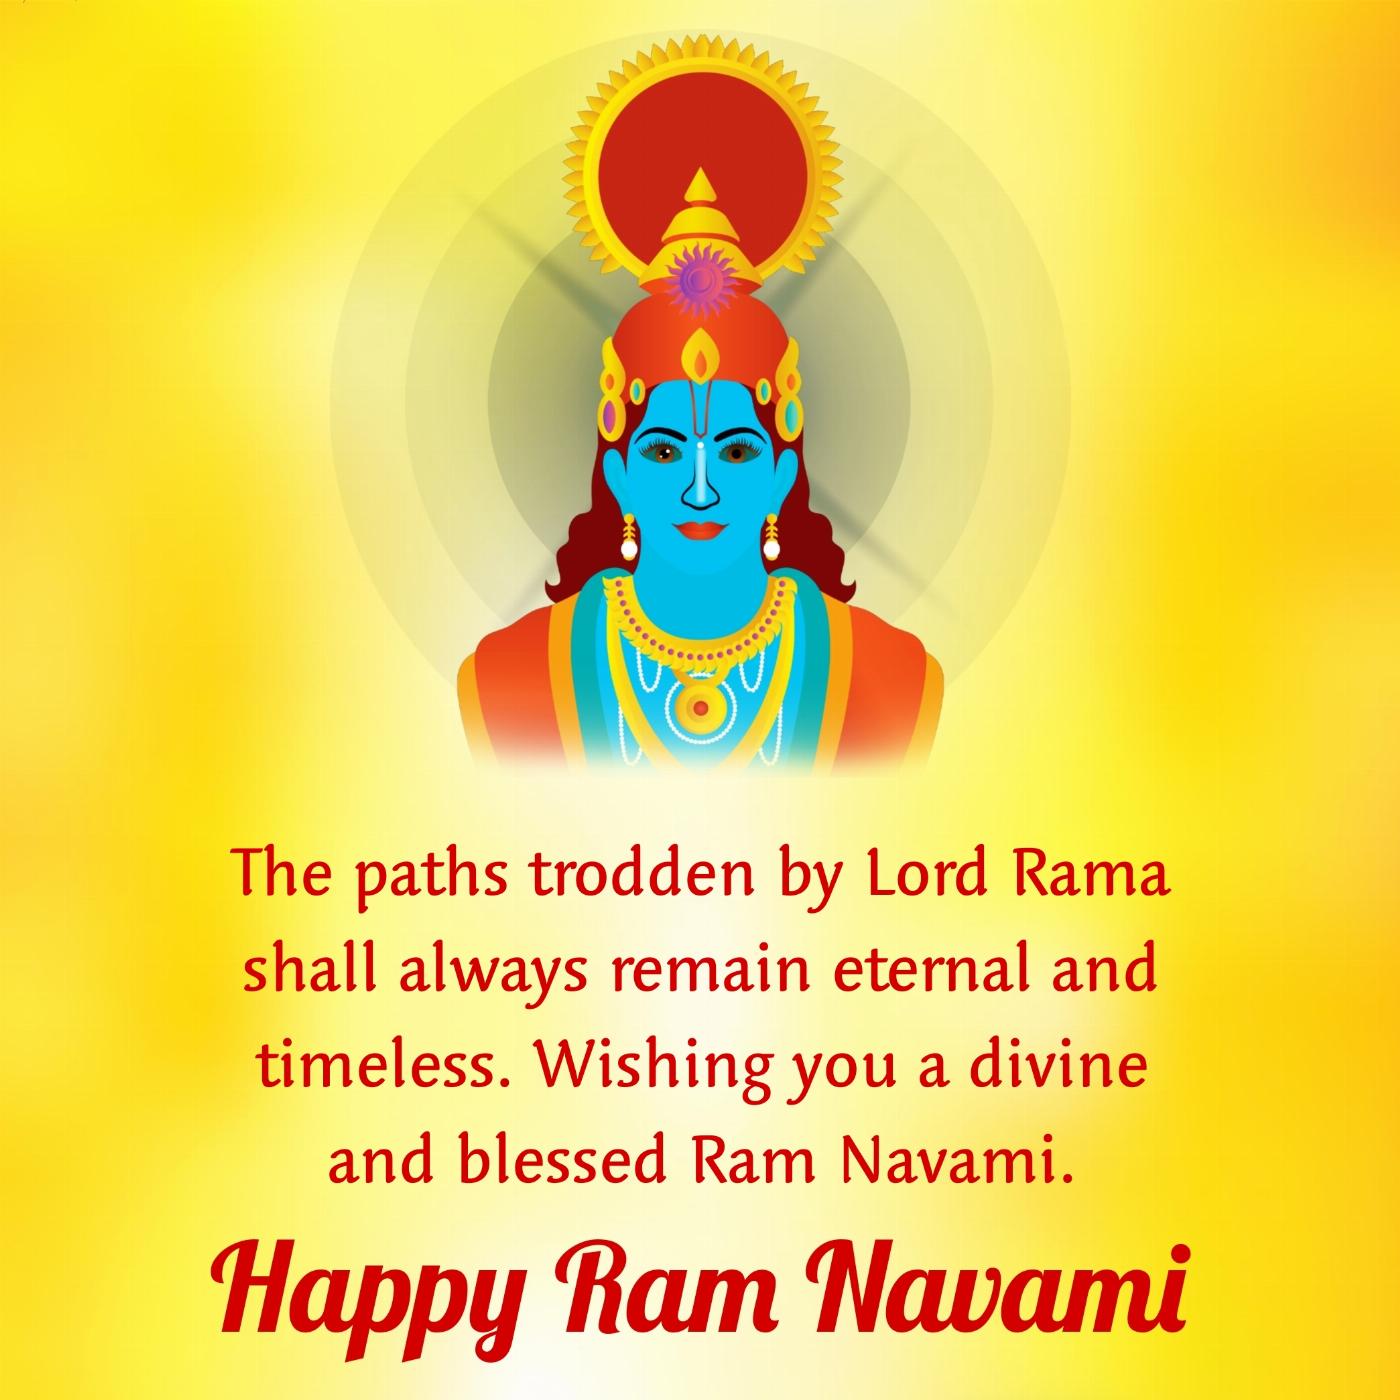 The paths trodden by Lord Rama shall always remain eternal